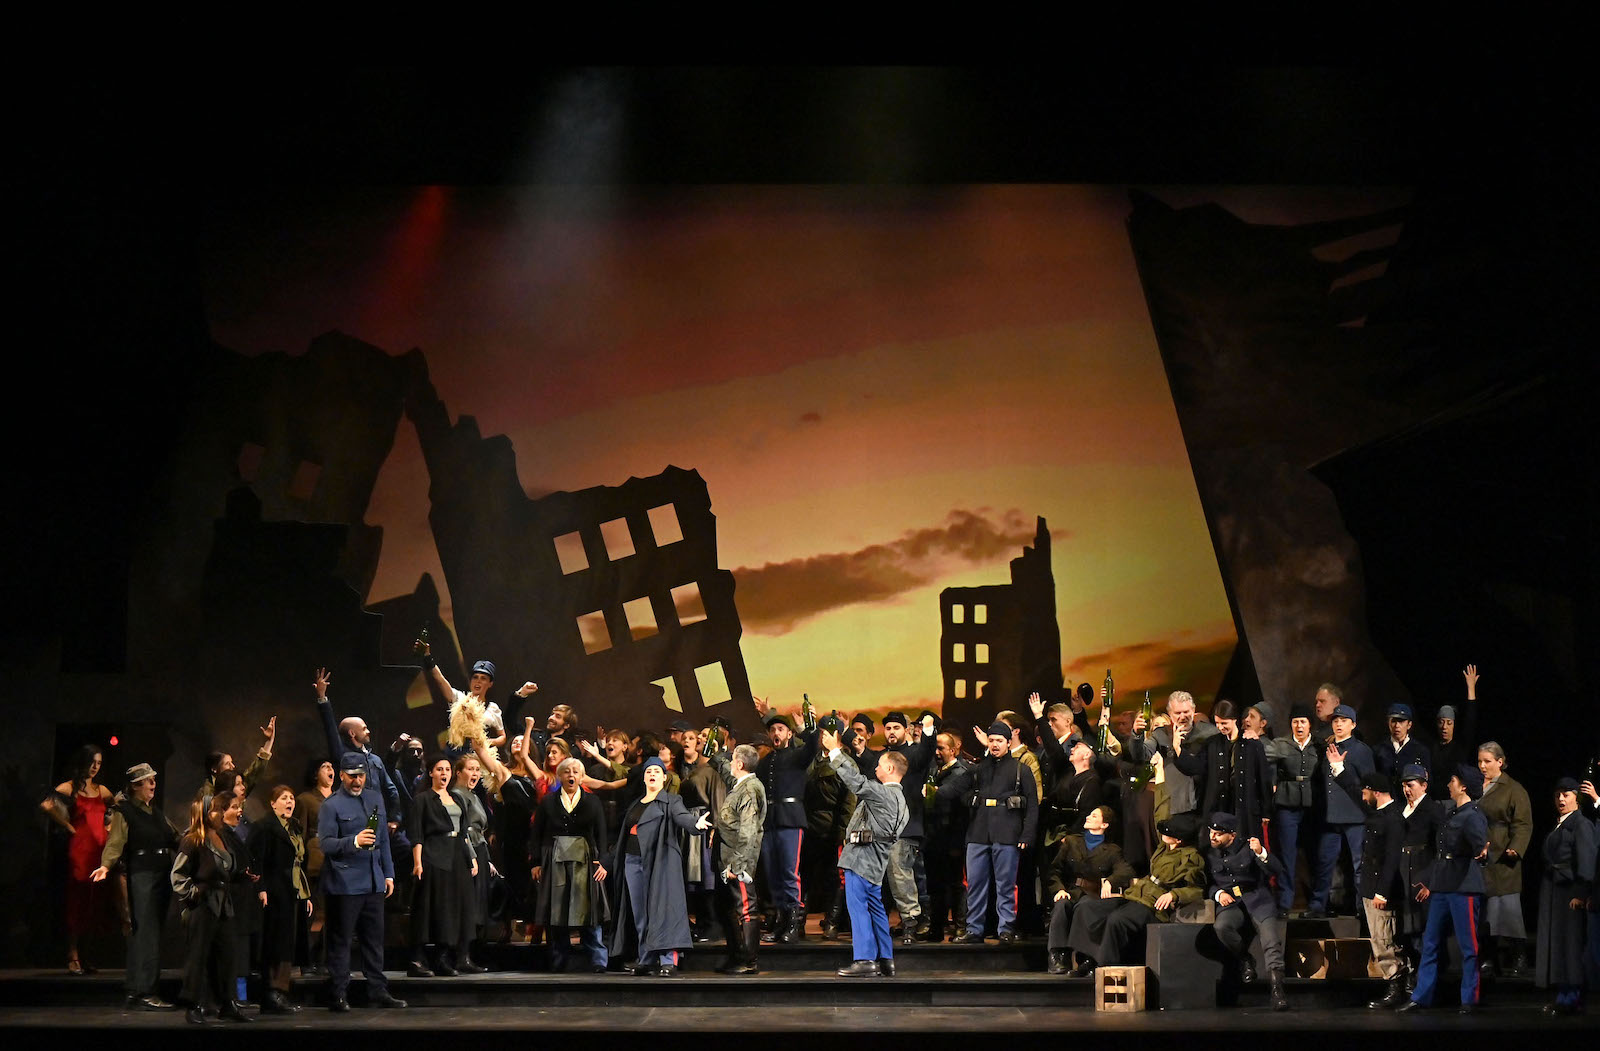 A large crowd singing onstage against a painted backdrop of a sunset